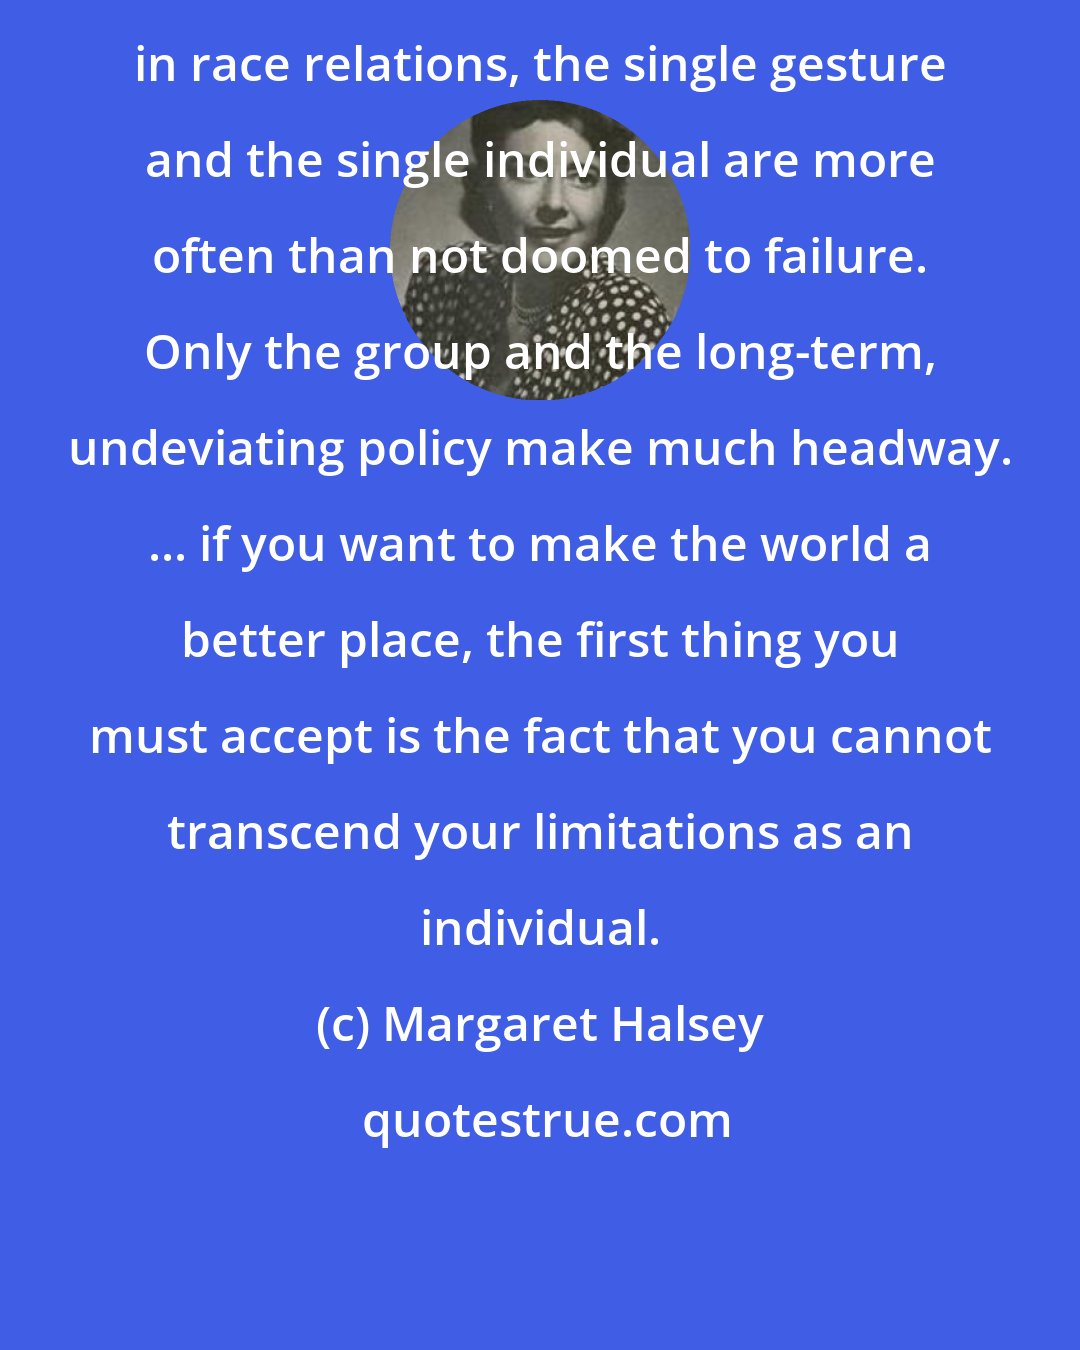 Margaret Halsey: in race relations, the single gesture and the single individual are more often than not doomed to failure. Only the group and the long-term, undeviating policy make much headway. ... if you want to make the world a better place, the first thing you must accept is the fact that you cannot transcend your limitations as an individual.